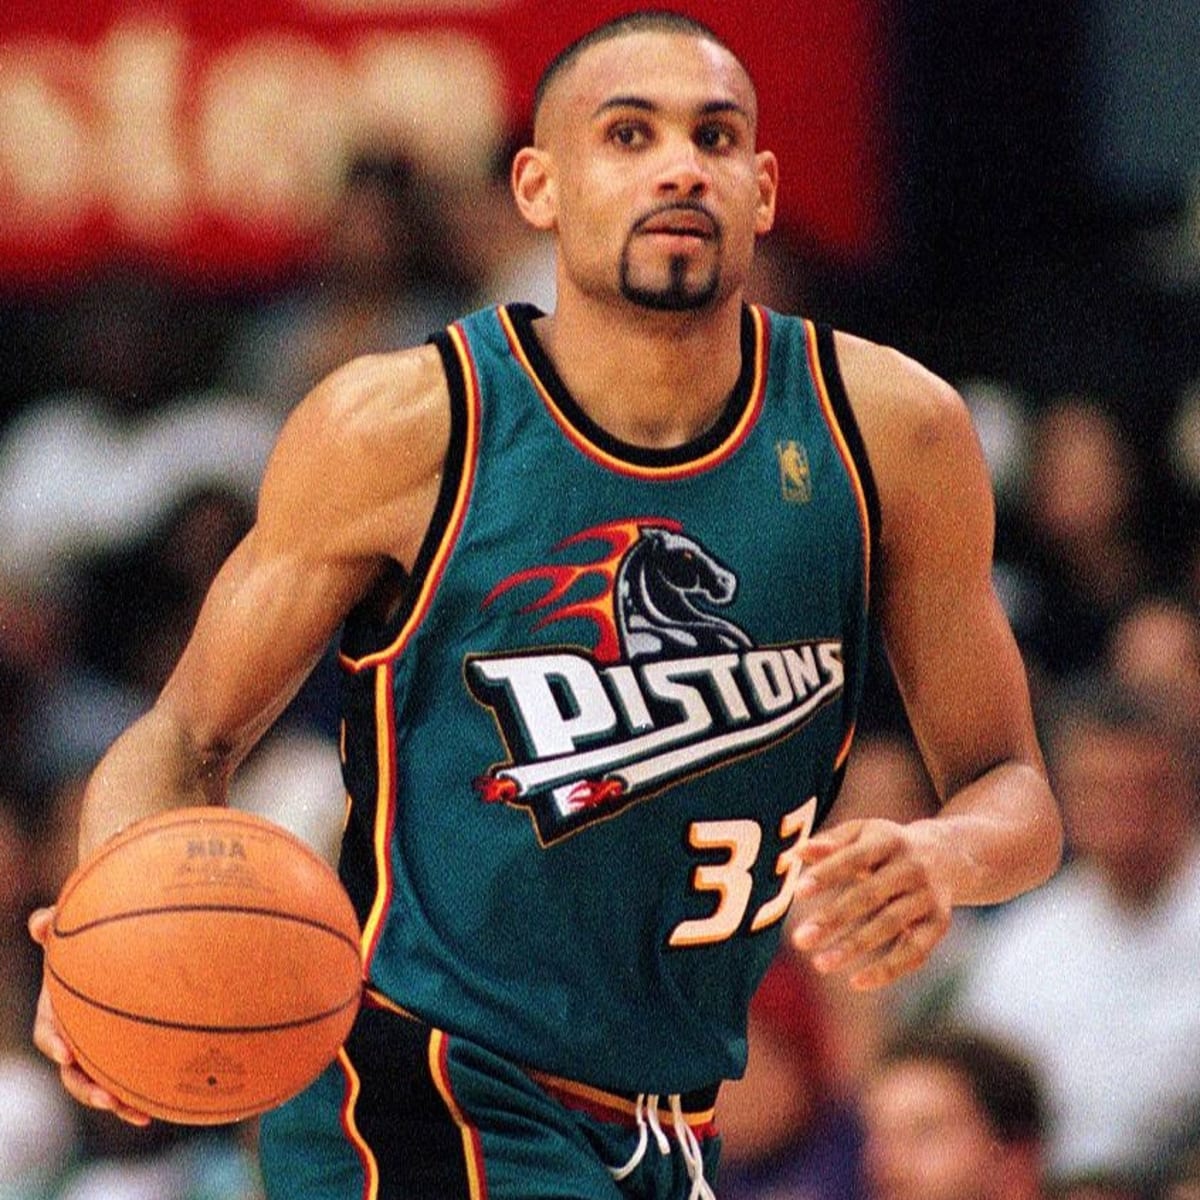 Pistons to Bring Back Classic Teal Throwback Jersey For 2022